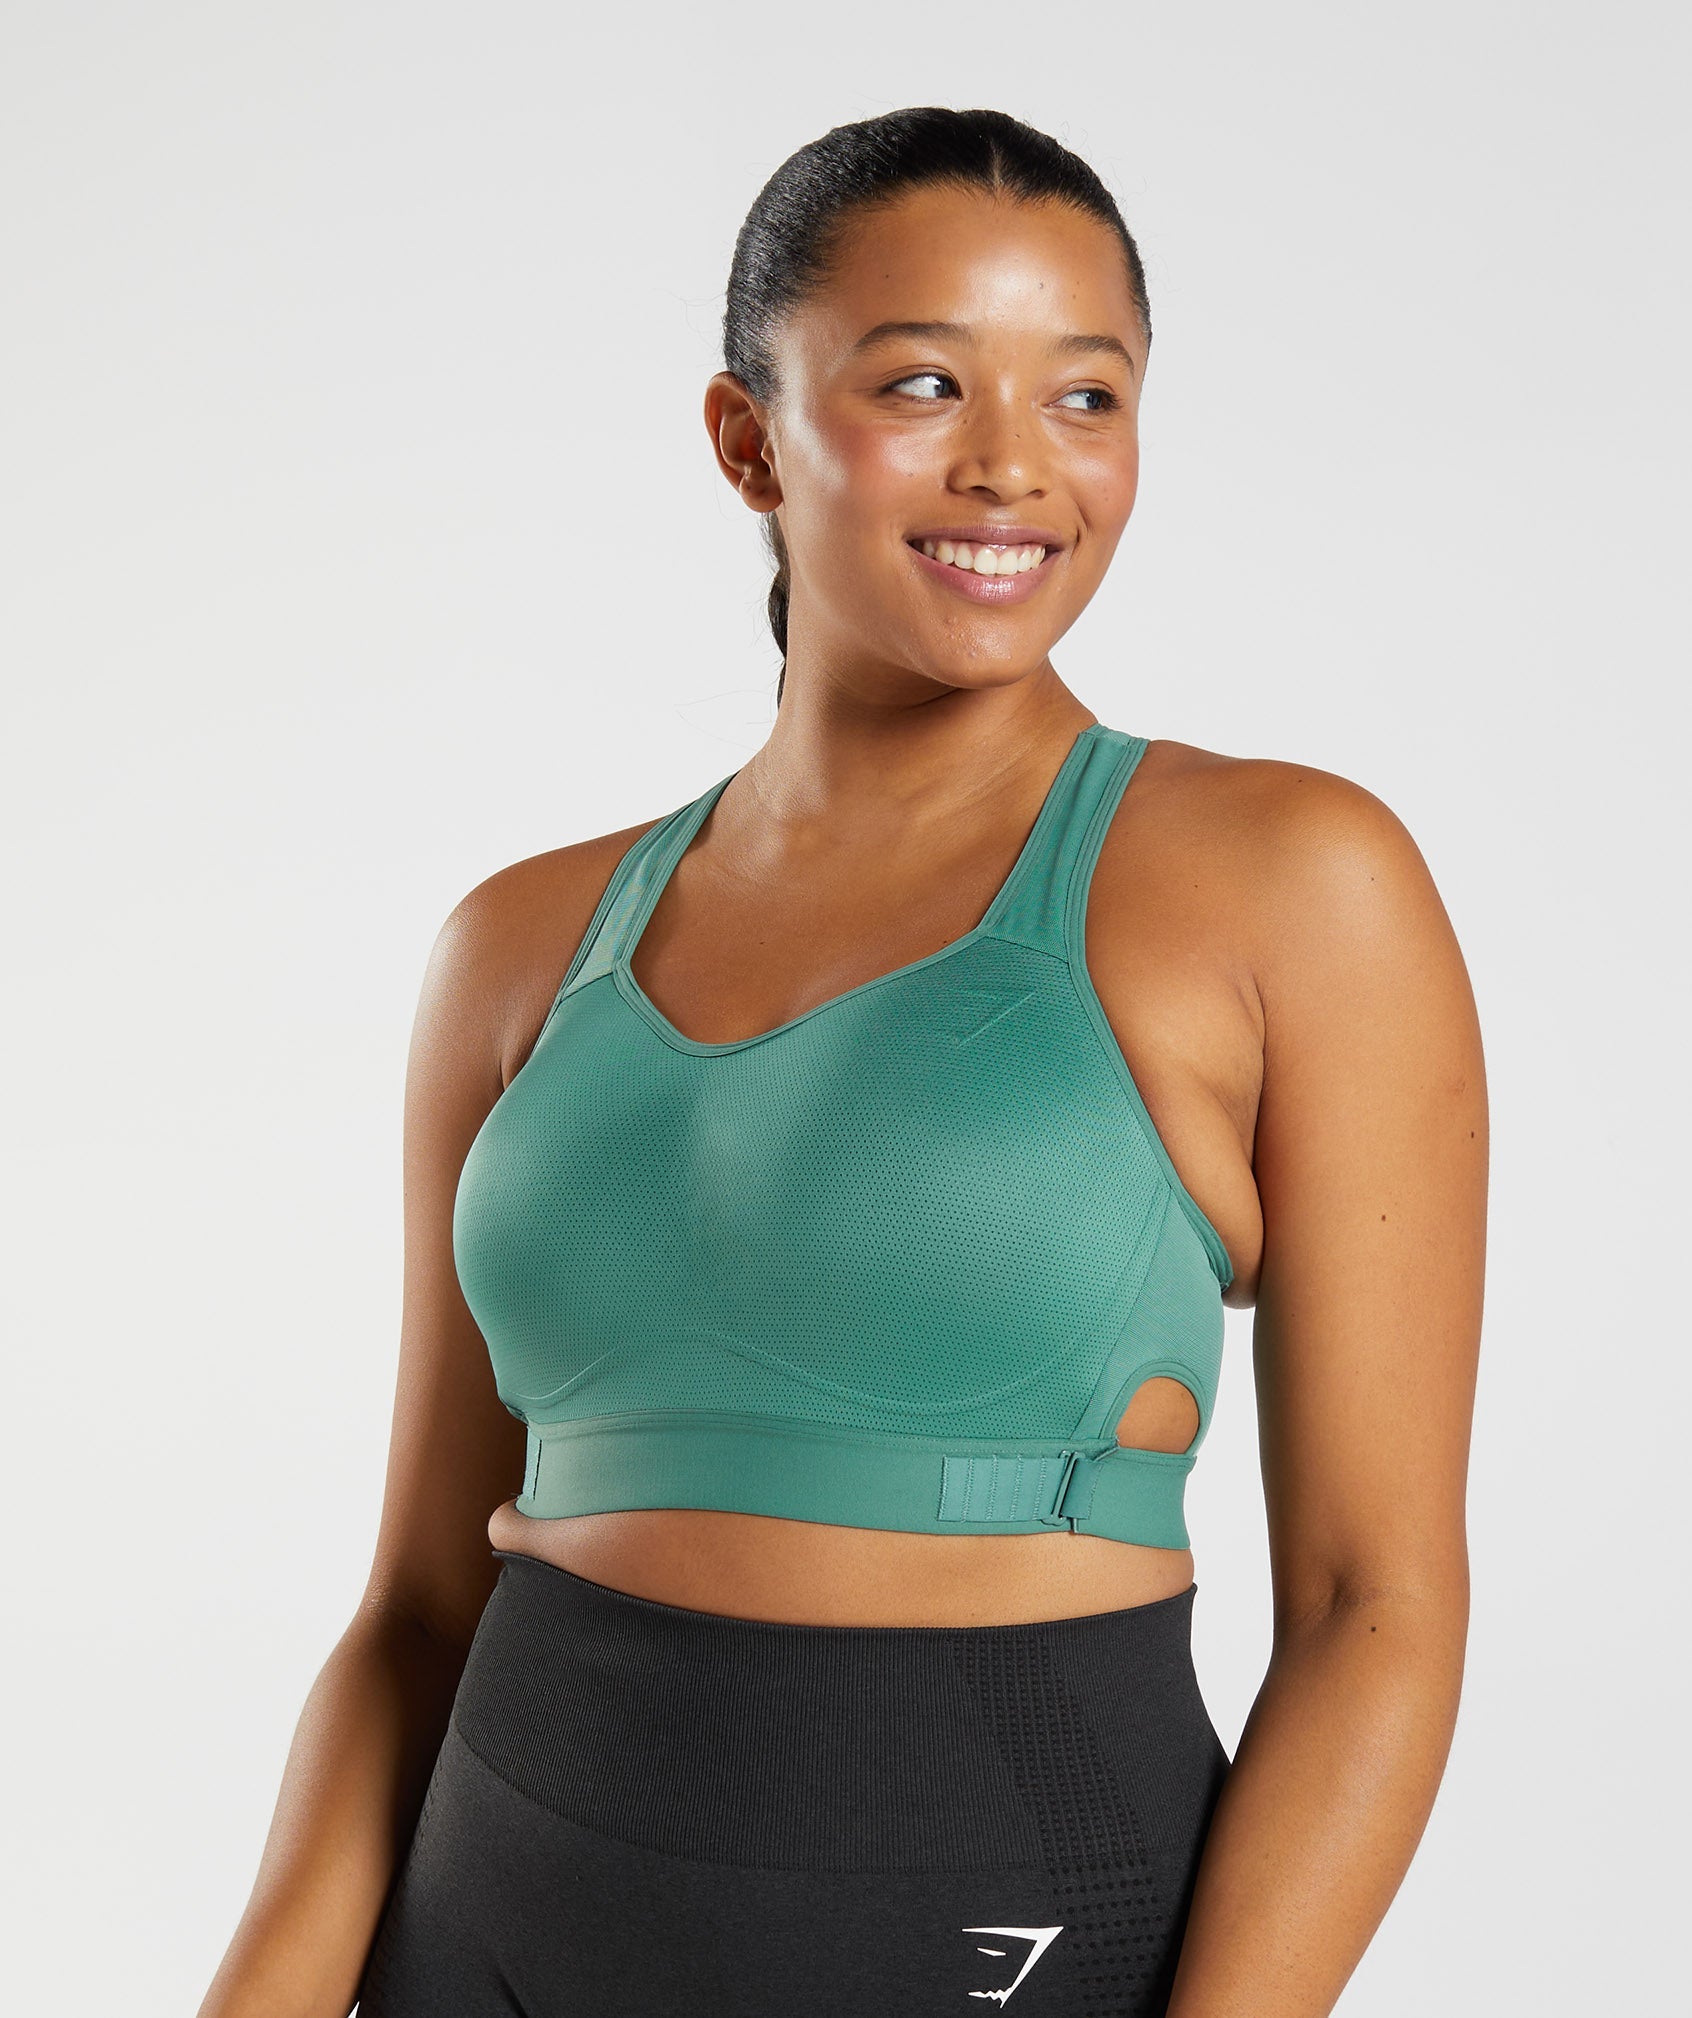  Racerback Sports Bras for Women - High Impact Support